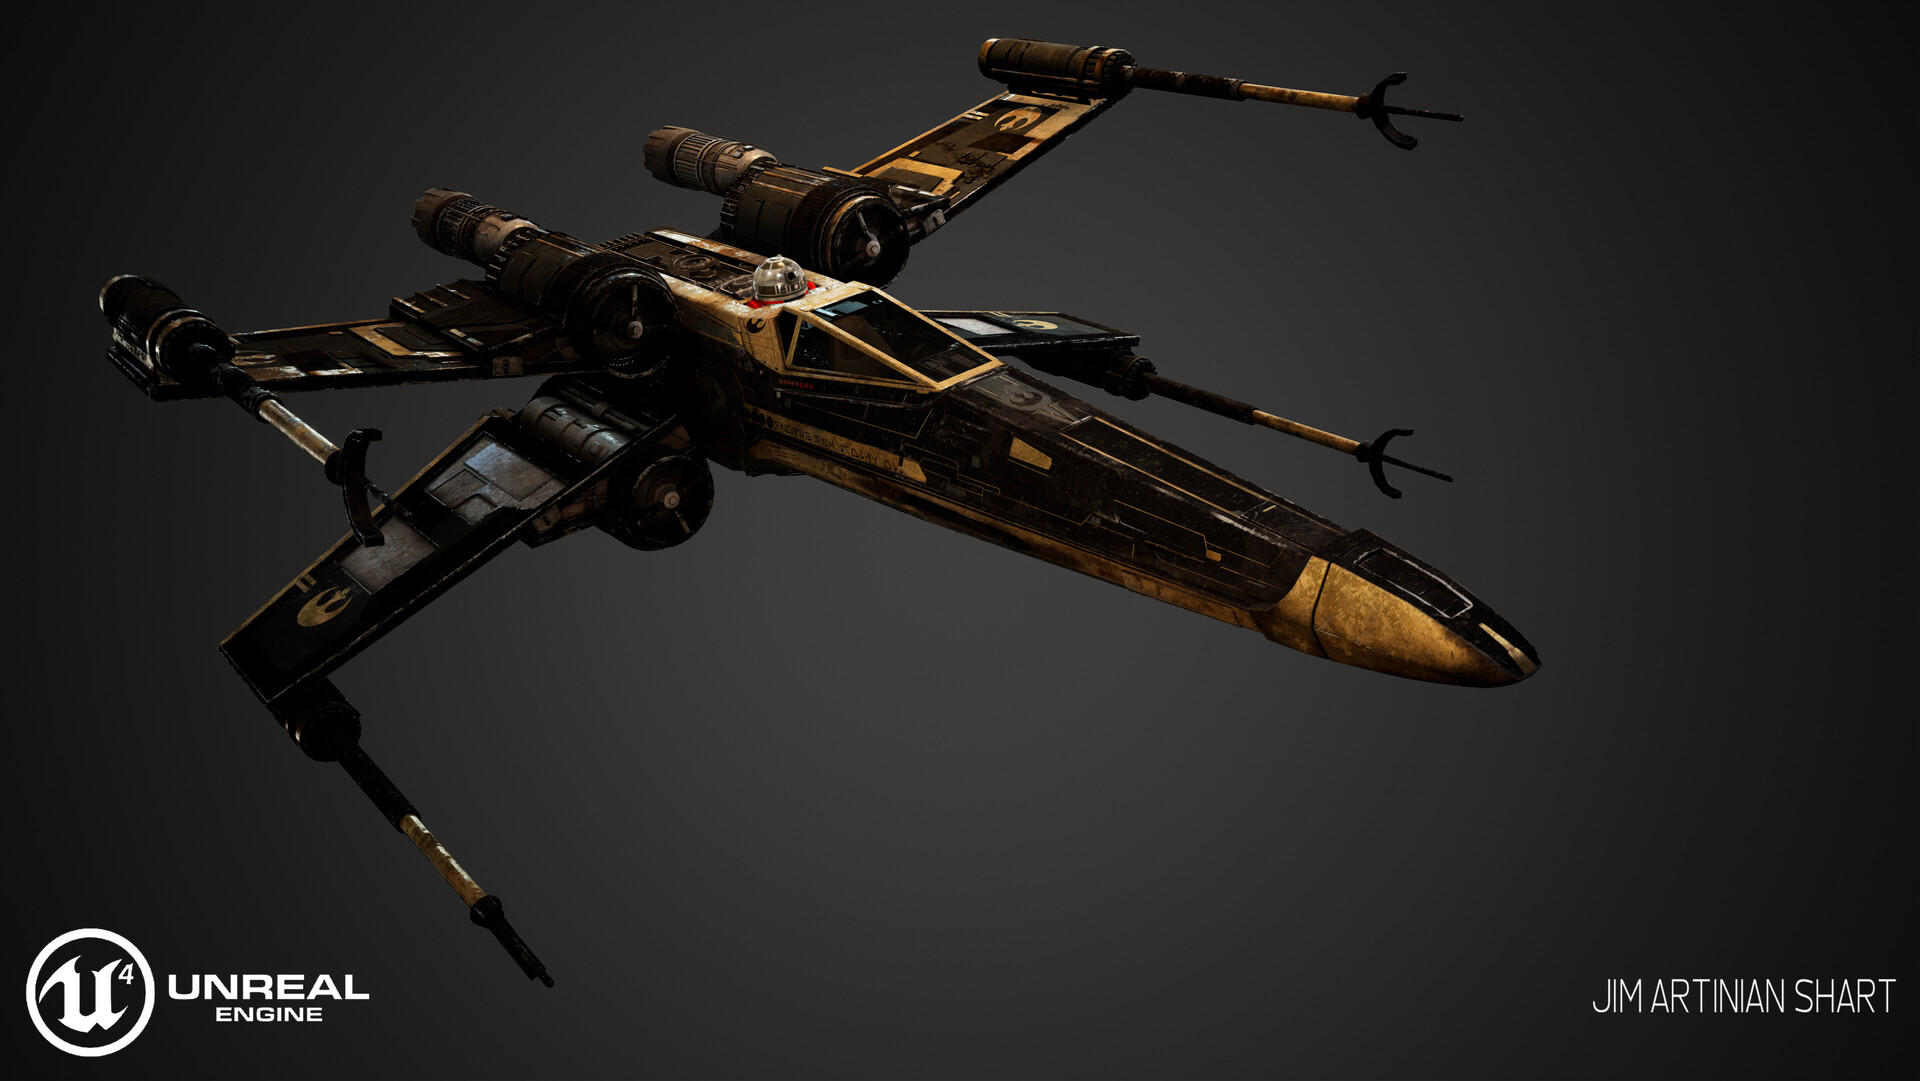 X-WING (SHADOW VARIANT)